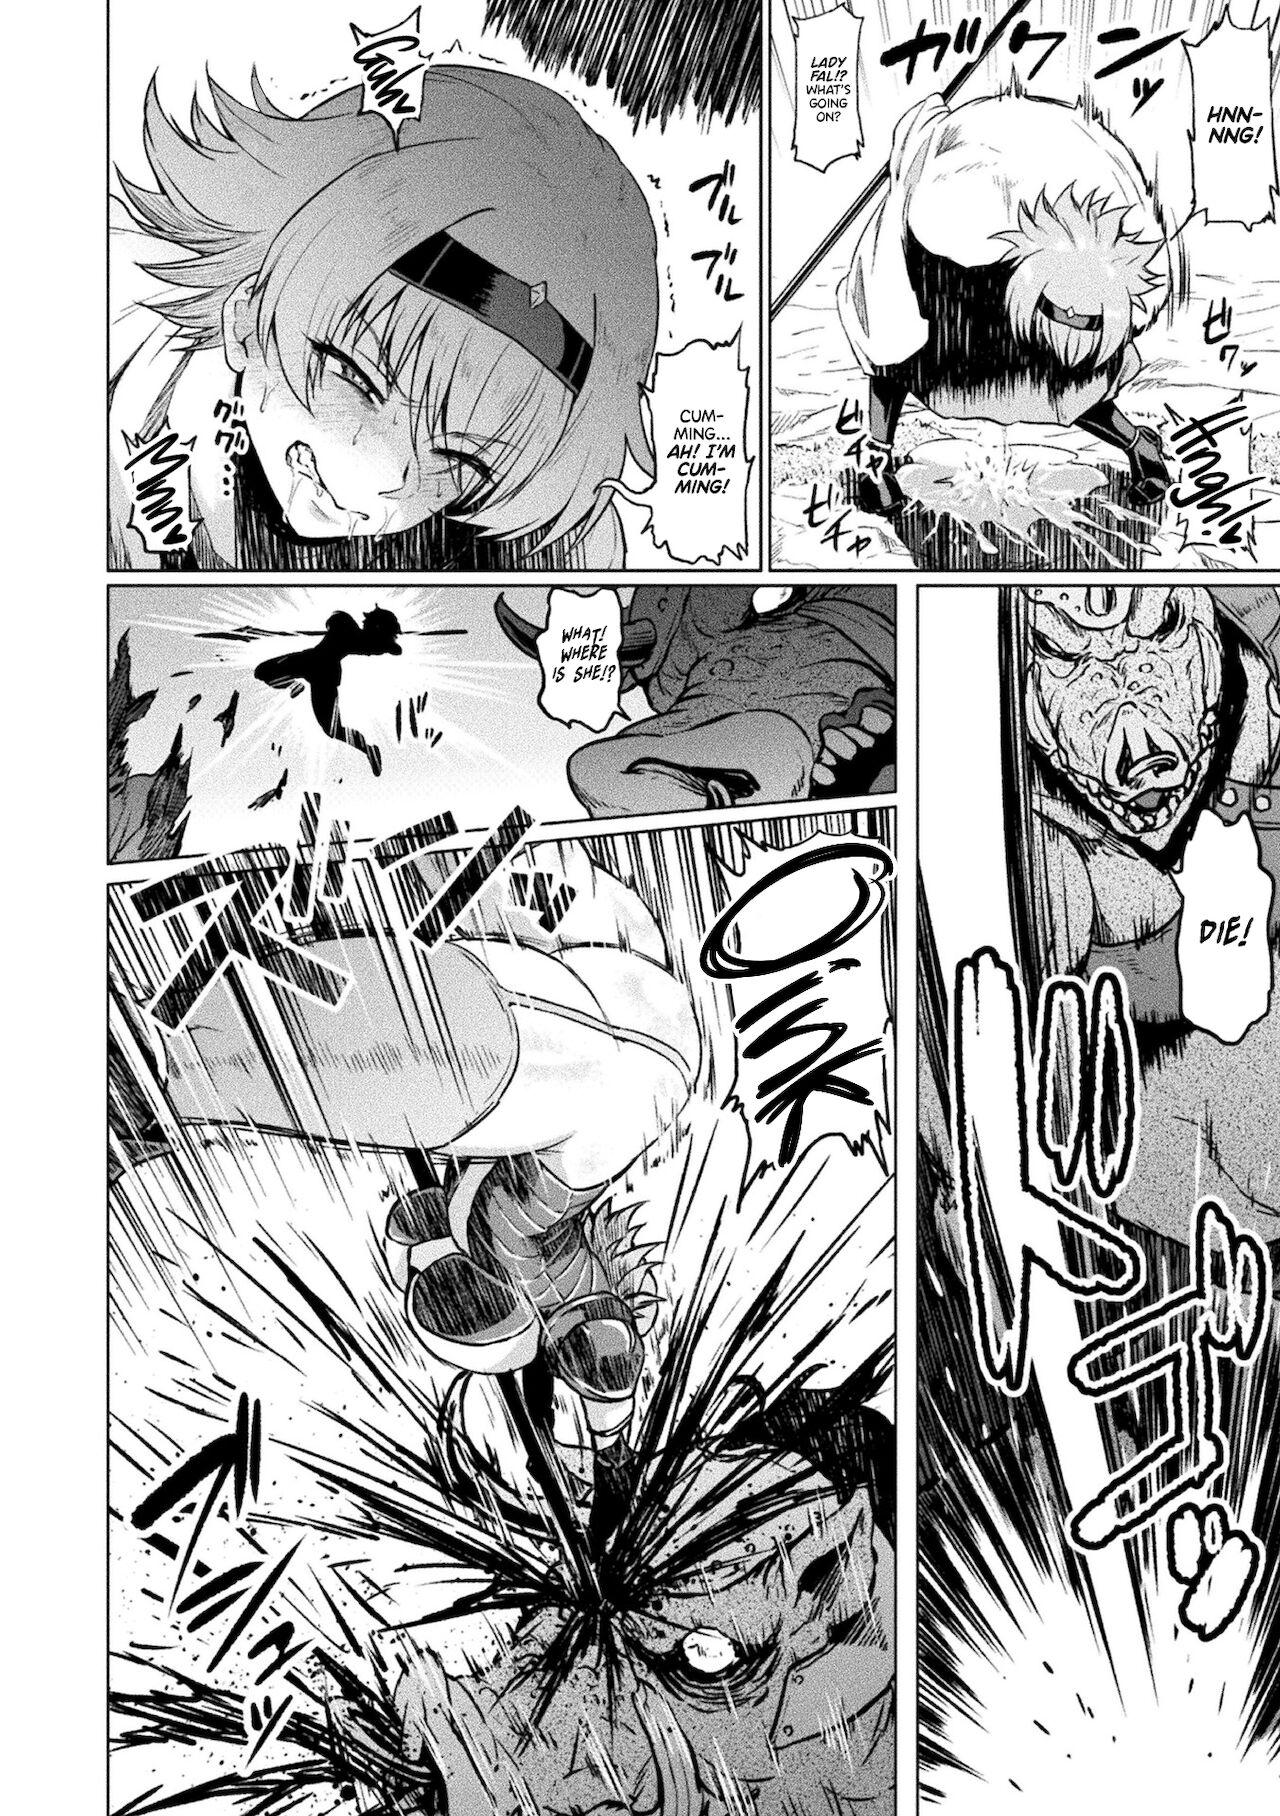 Hot Brunette Faru to Noroi no Soubi | Fal and the Cursed Armor Tanga - Page 6